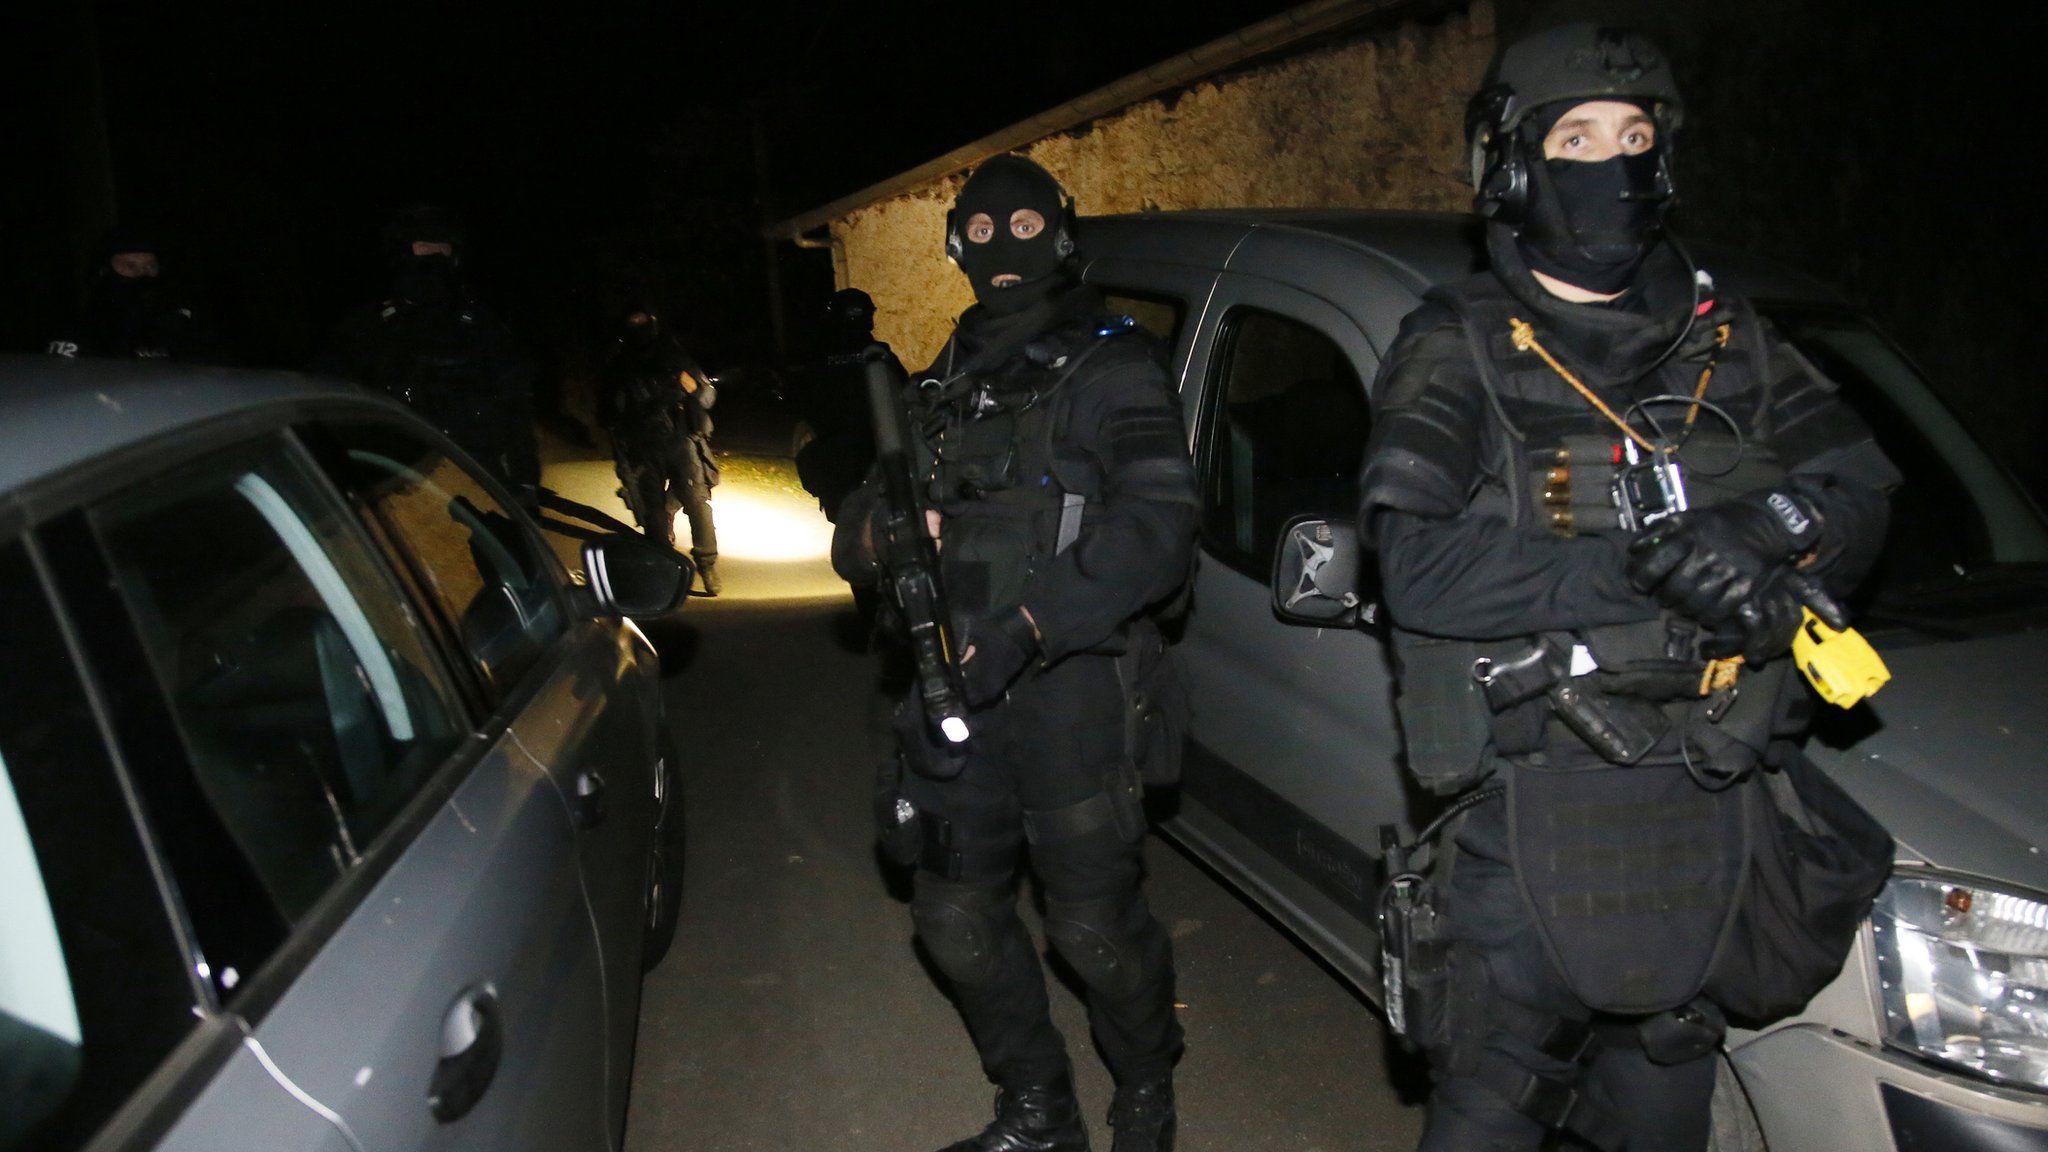 French police officers stand outside a house during a search operation in Louhossoa, south-western France, Friday, Dec 16, 2016